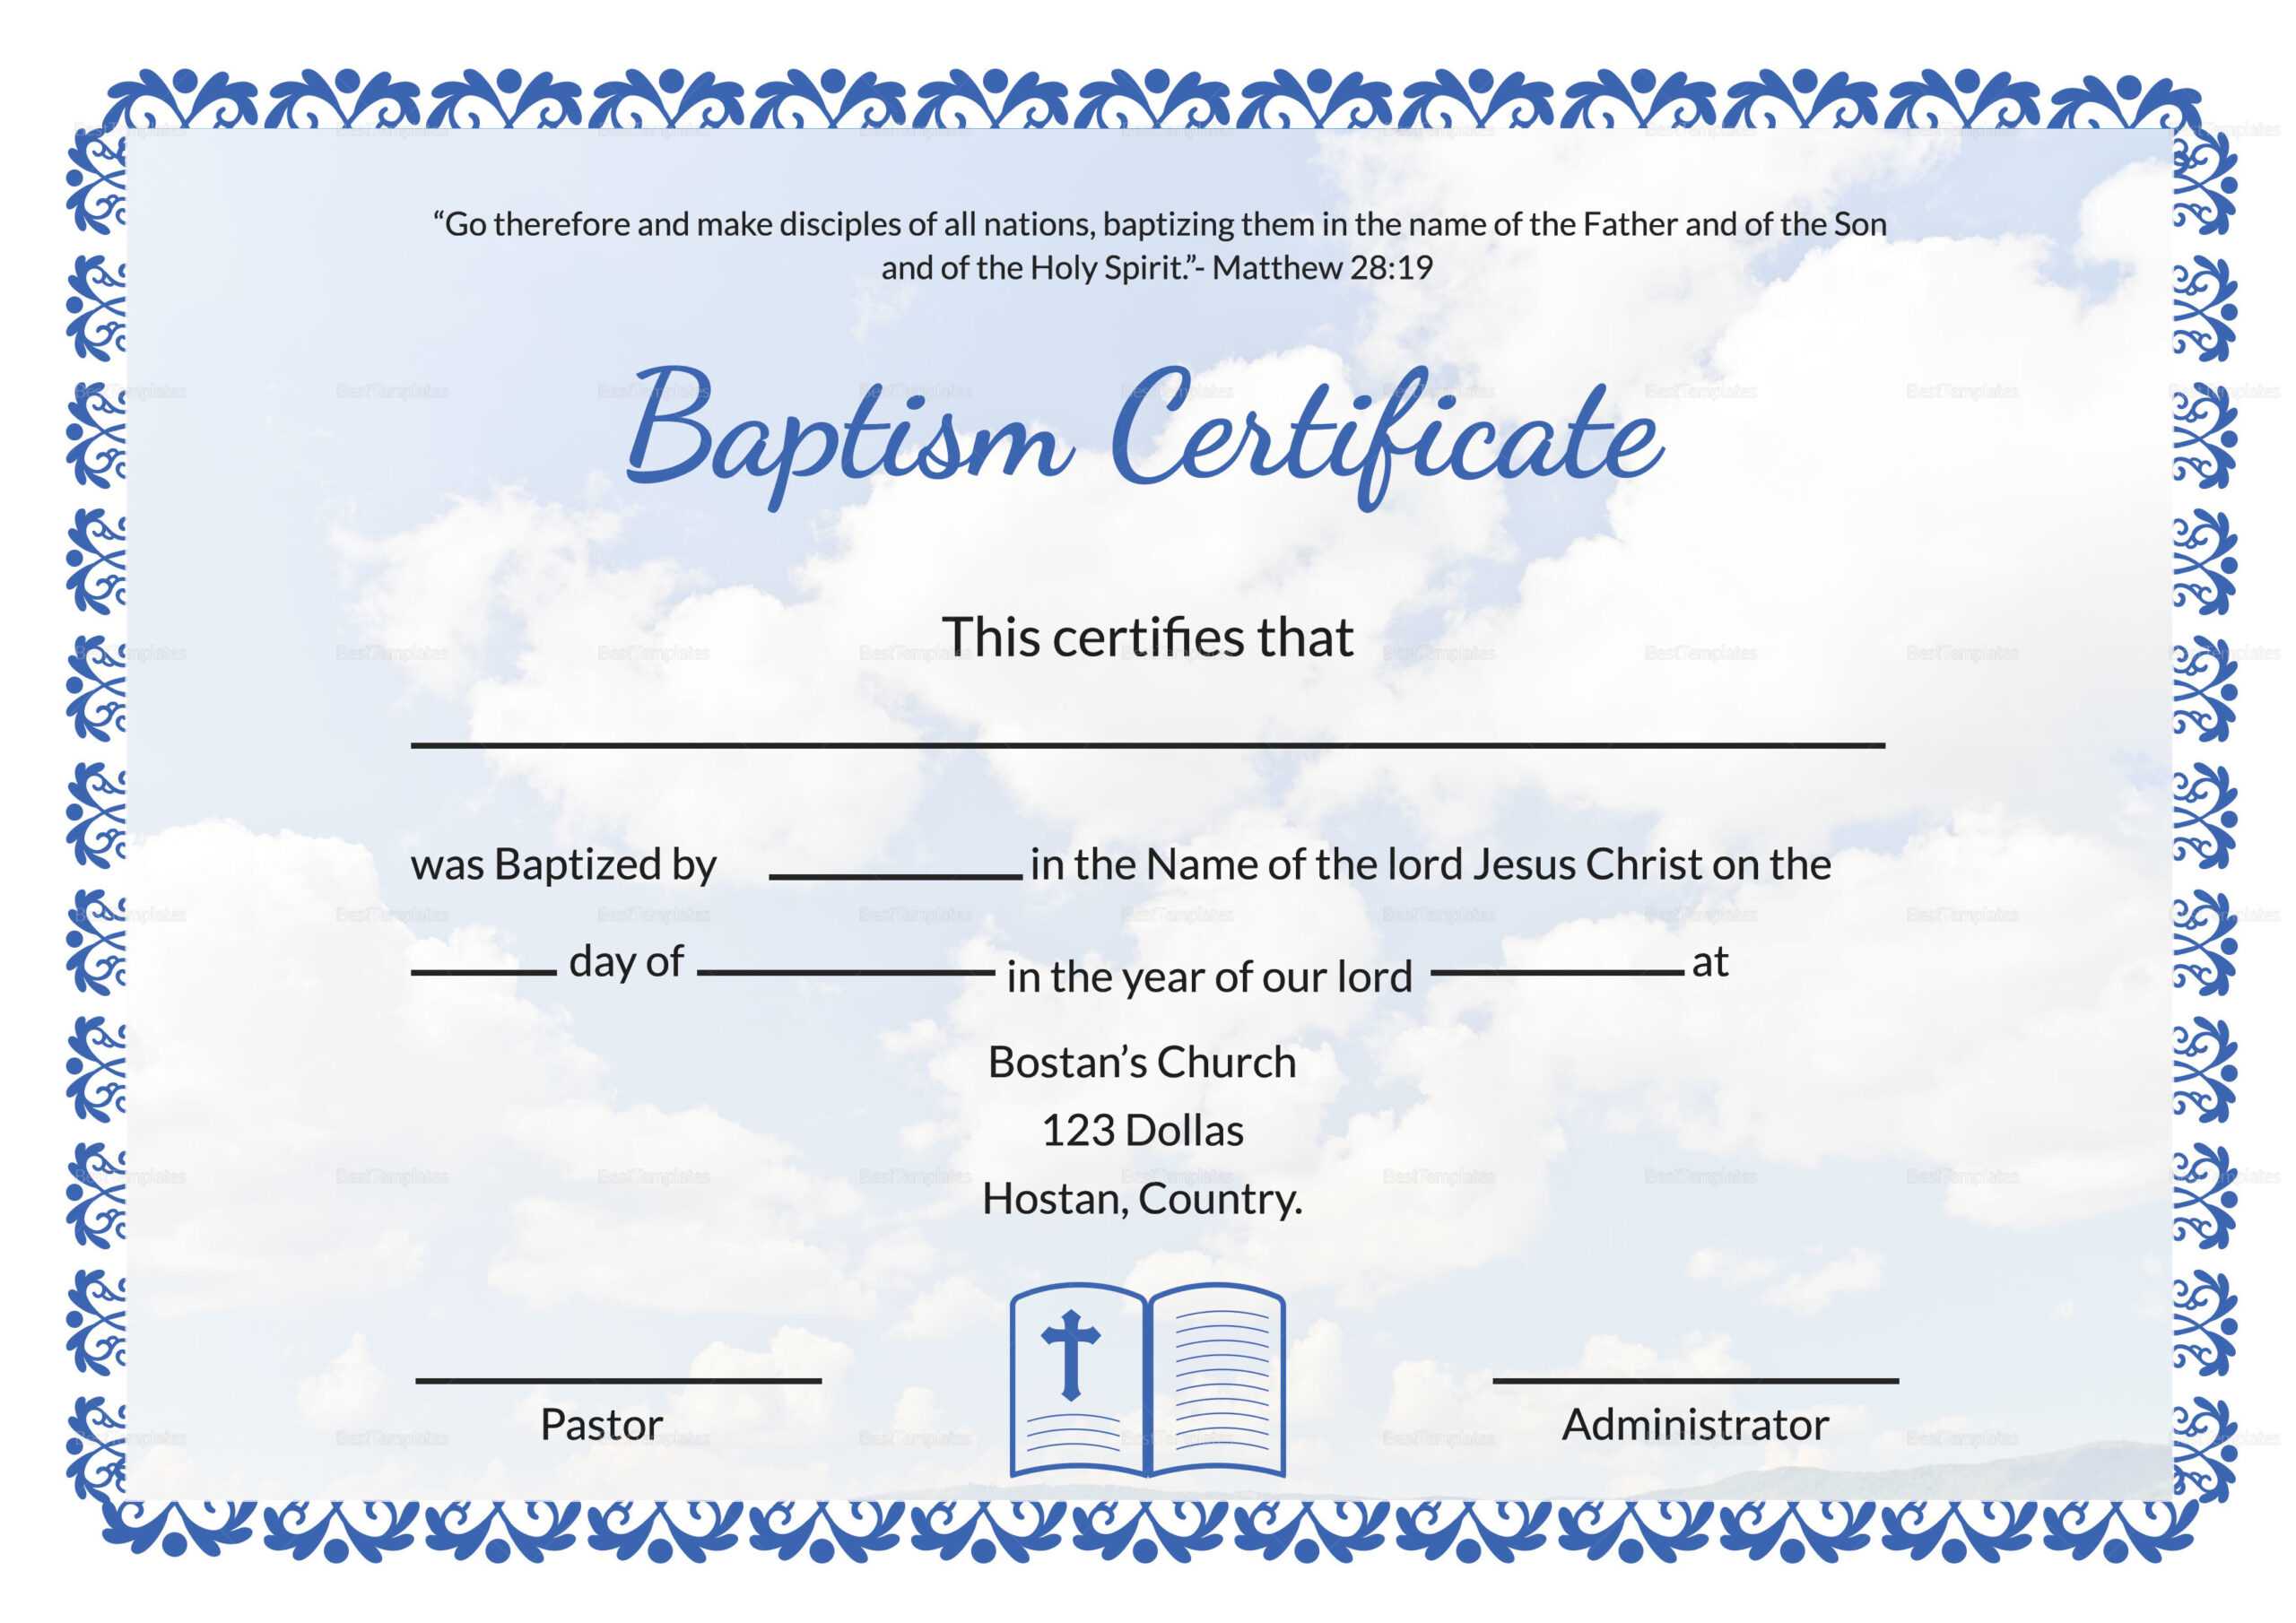 007 Certificate Of Baptism Template Ideas Unique Church Intended For Christian Certificate Template